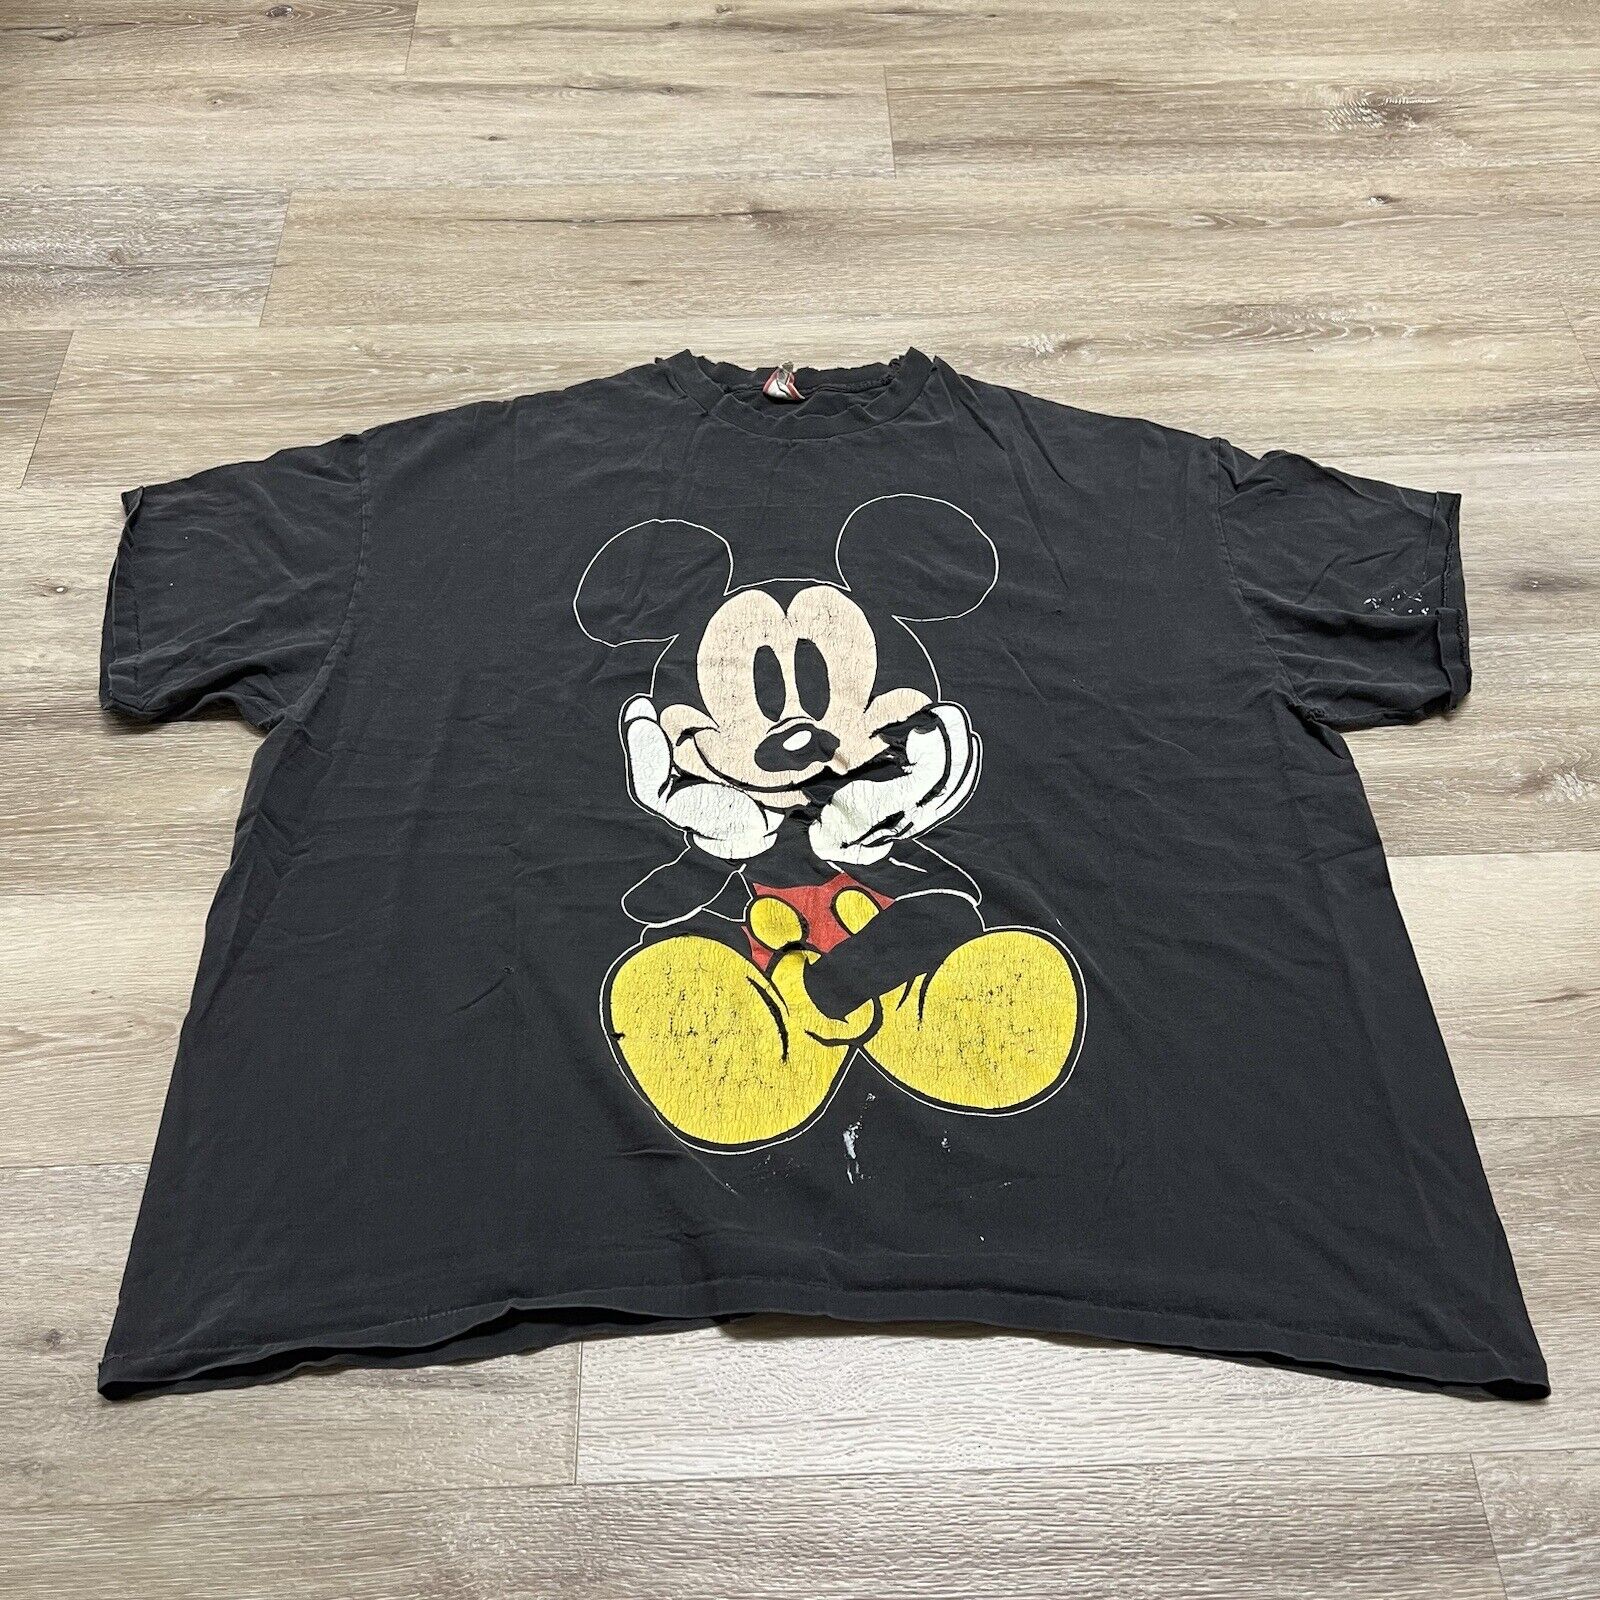 Vintage 90s Disney Mickey Mouse big graphic shirt Super Size Made in USA THRASH